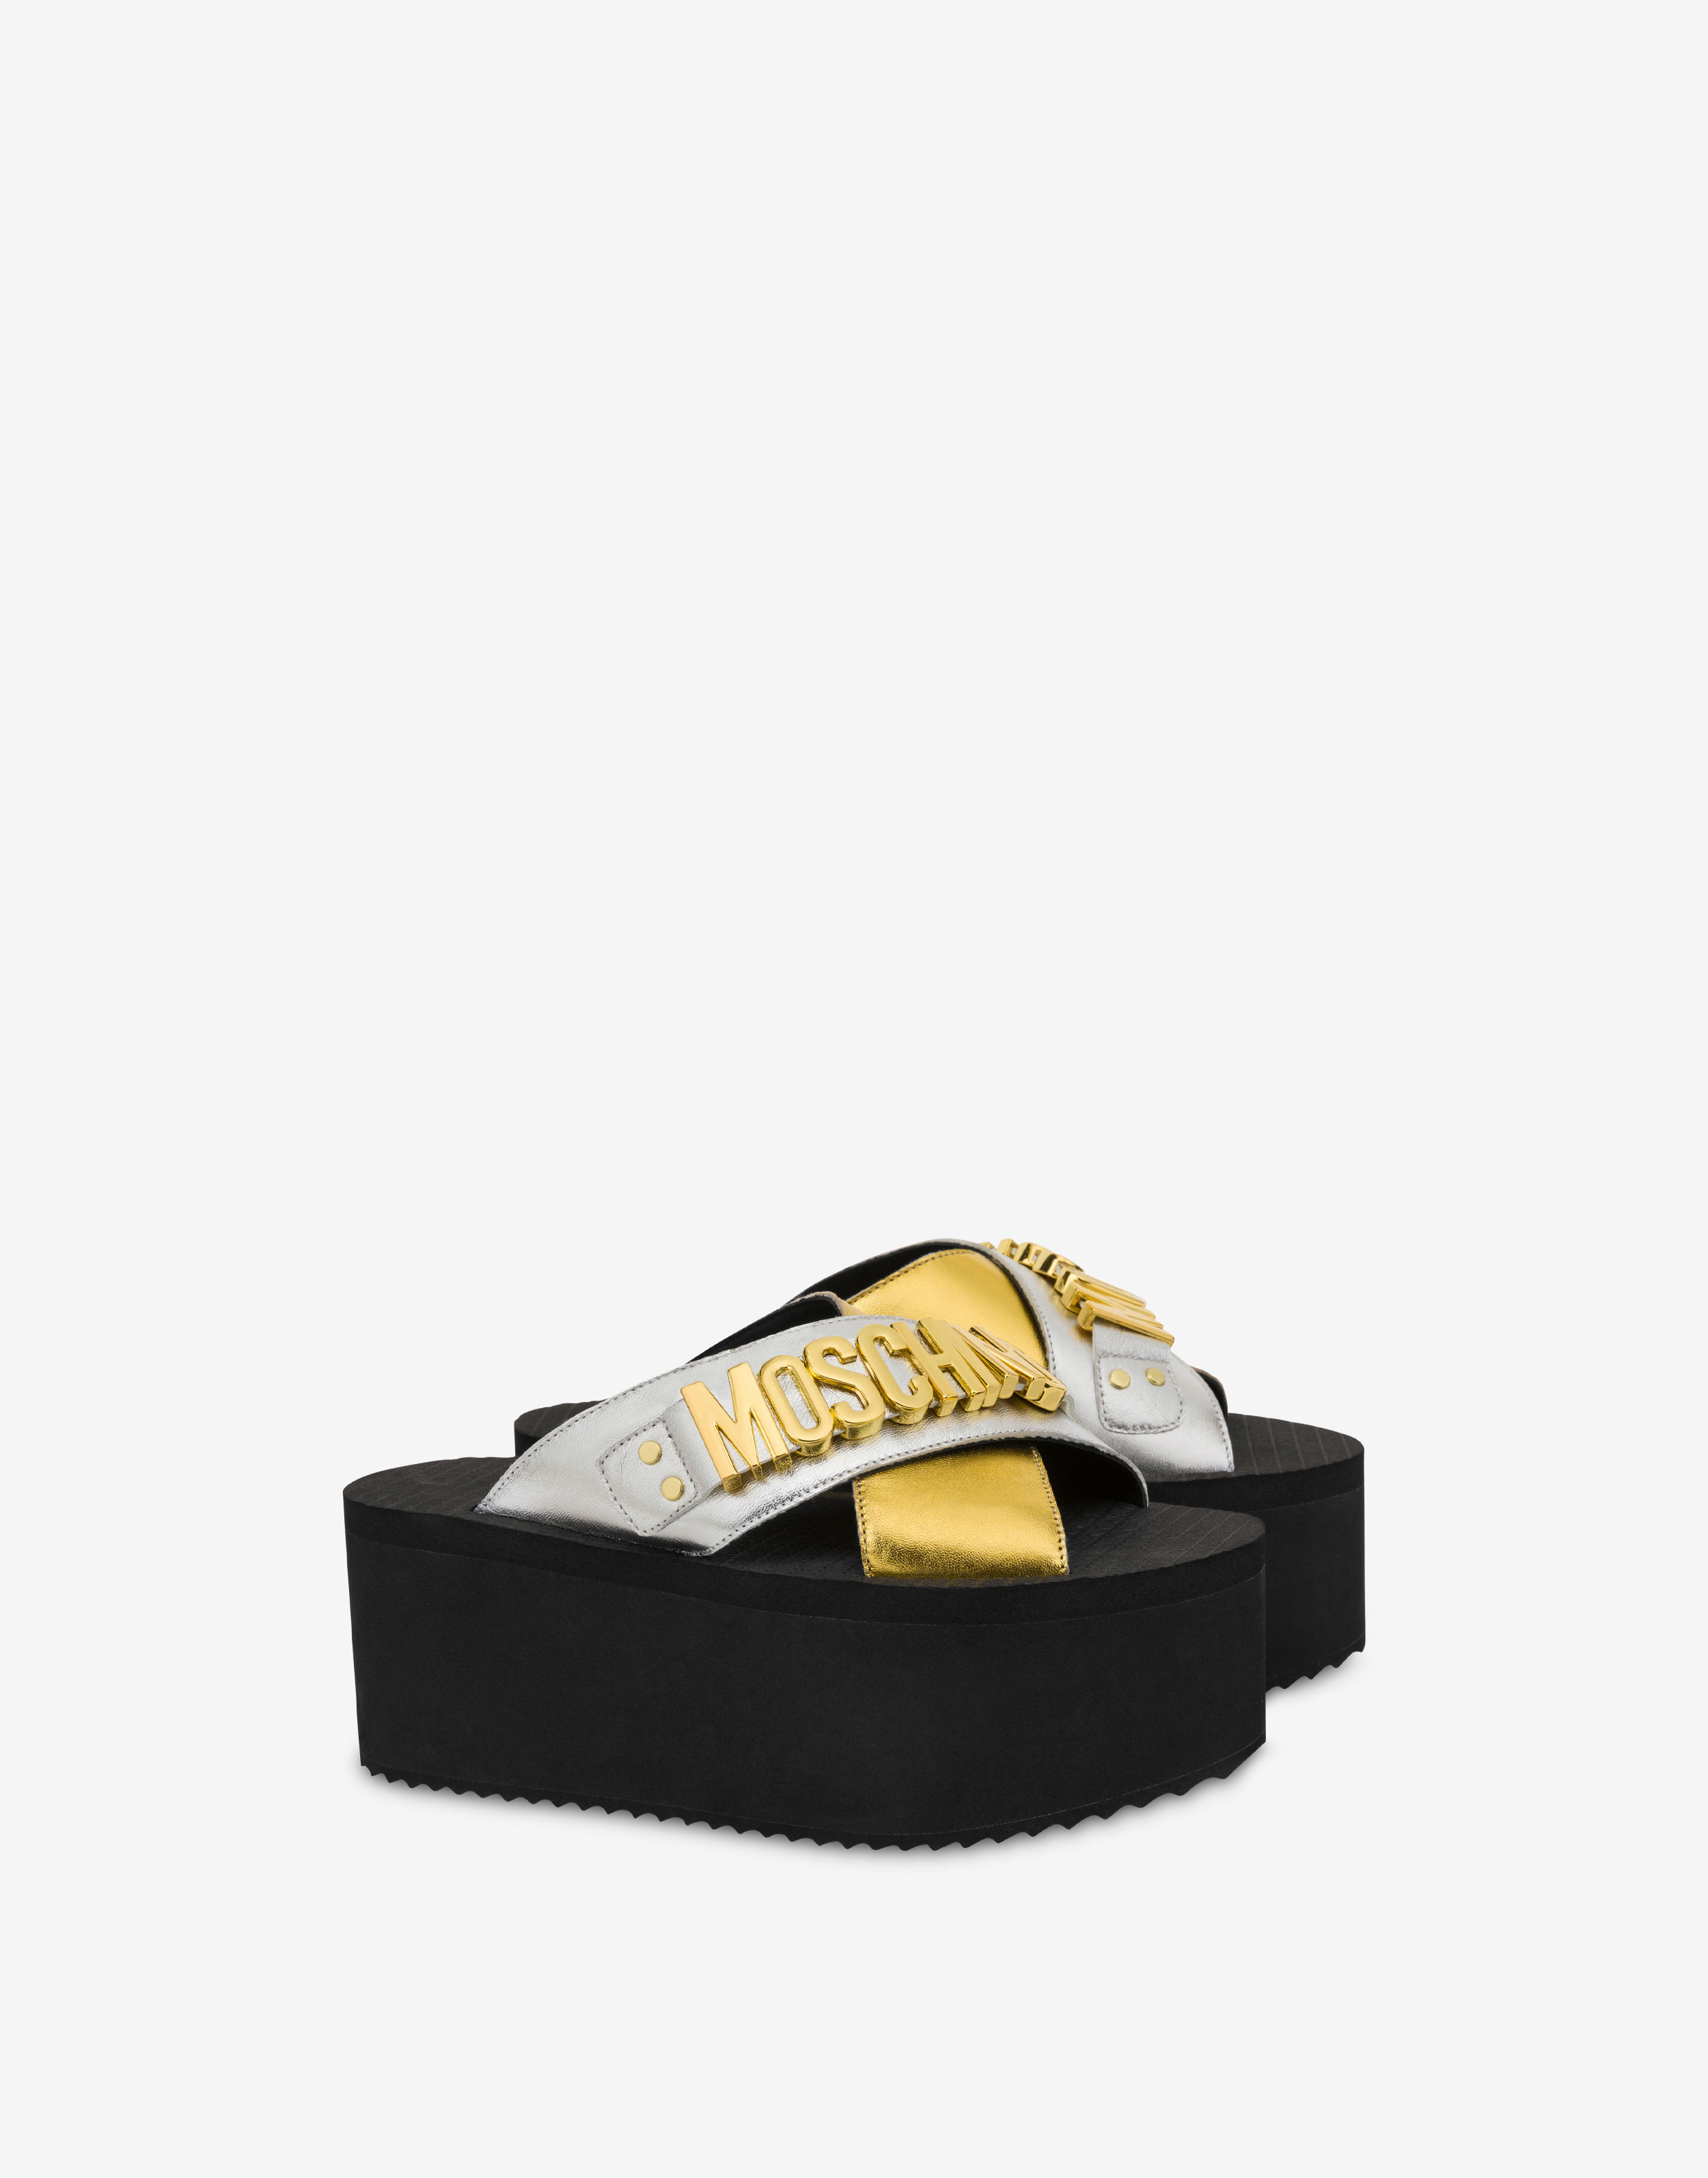 Moschino Shoes for Women - Official Store US